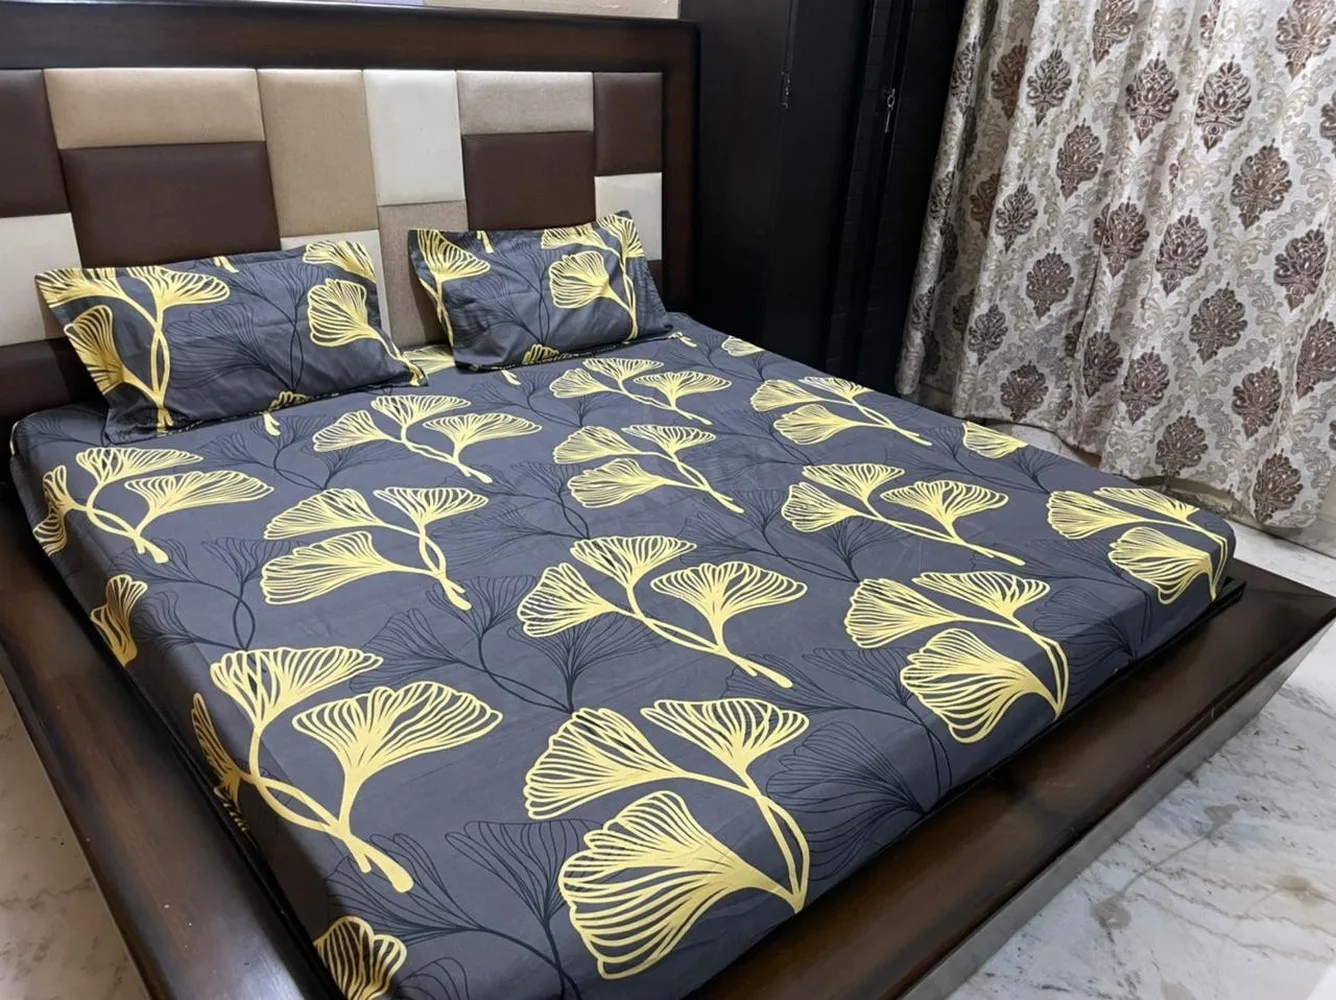 Bedsheet printed, Fitted, Elastic Corner, 90x100, Glace Cotton, 2 Pillow Covers, purple leaf design